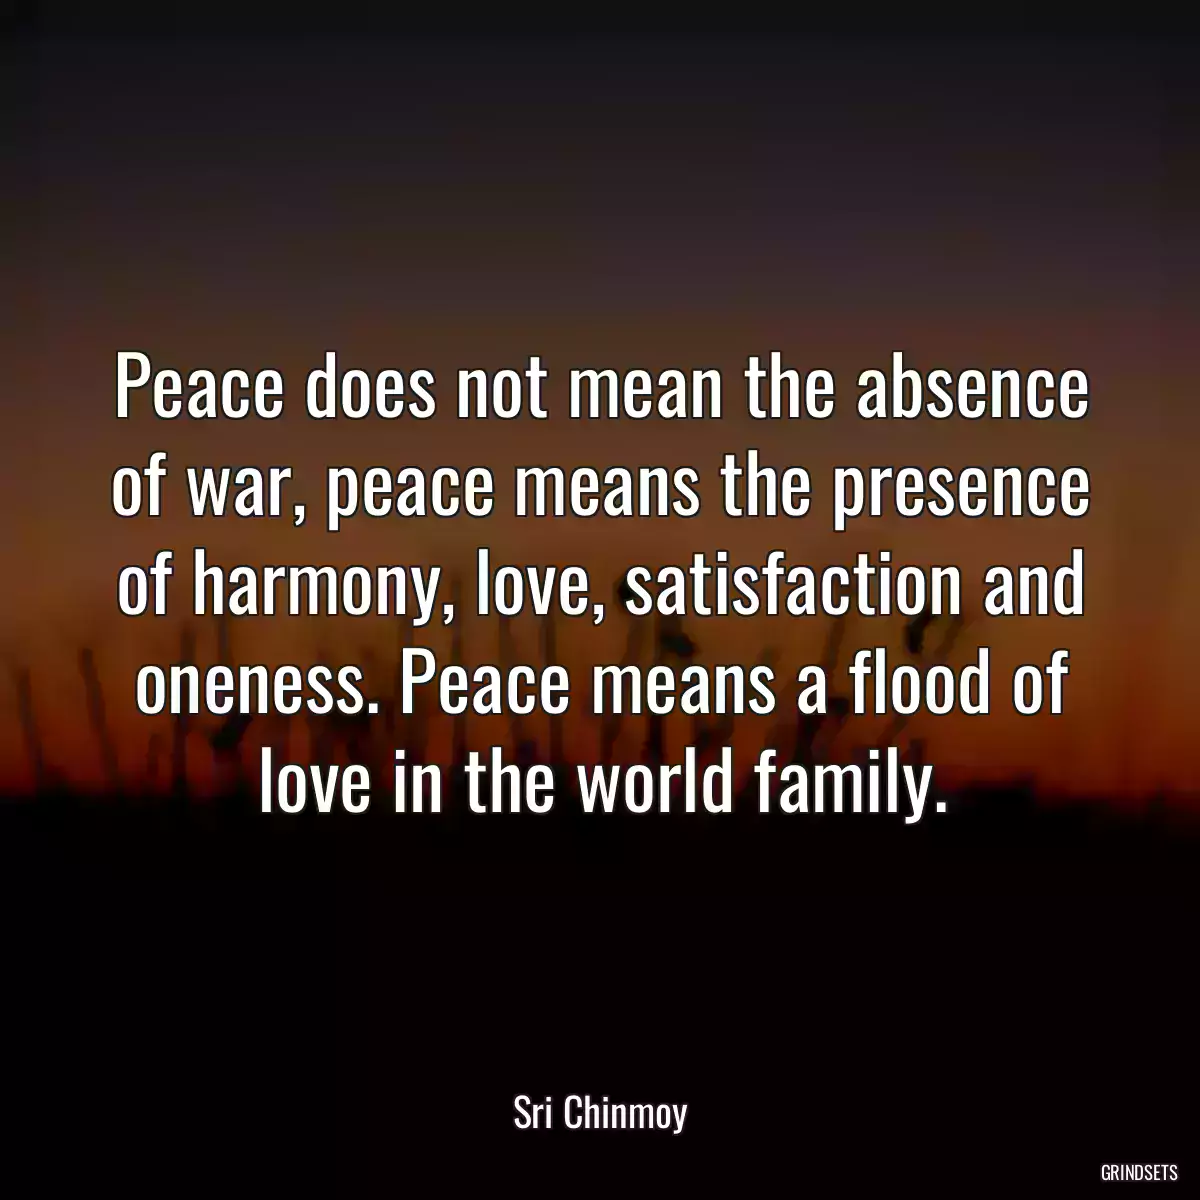 Peace does not mean the absence of war, peace means the presence of harmony, love, satisfaction and oneness. Peace means a flood of love in the world family.